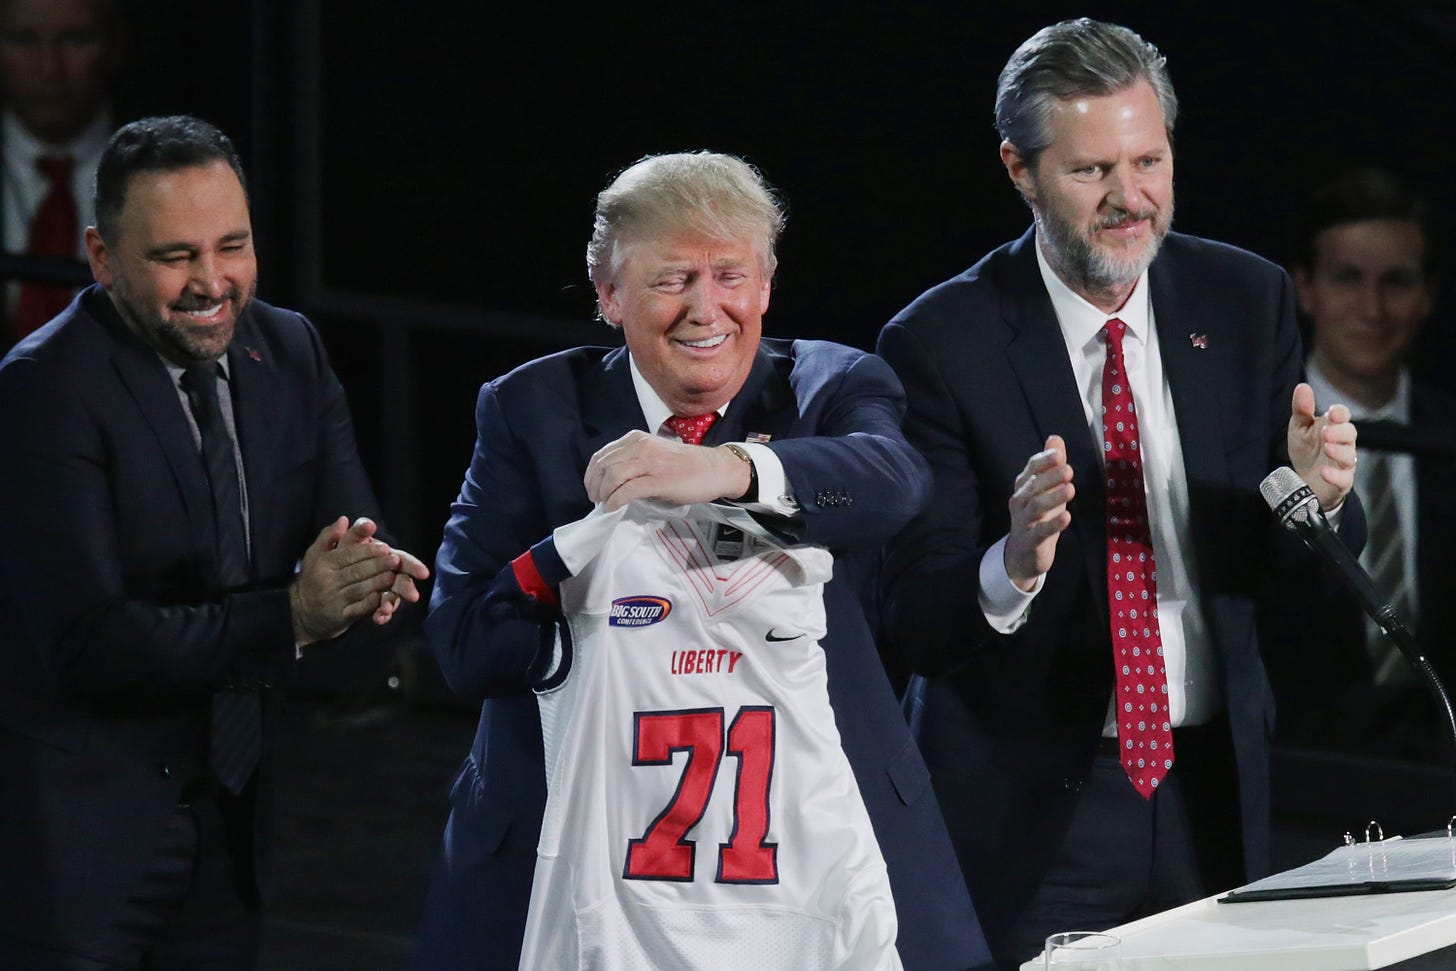 Trump to Deliver Liberty University Commencement Address | Time